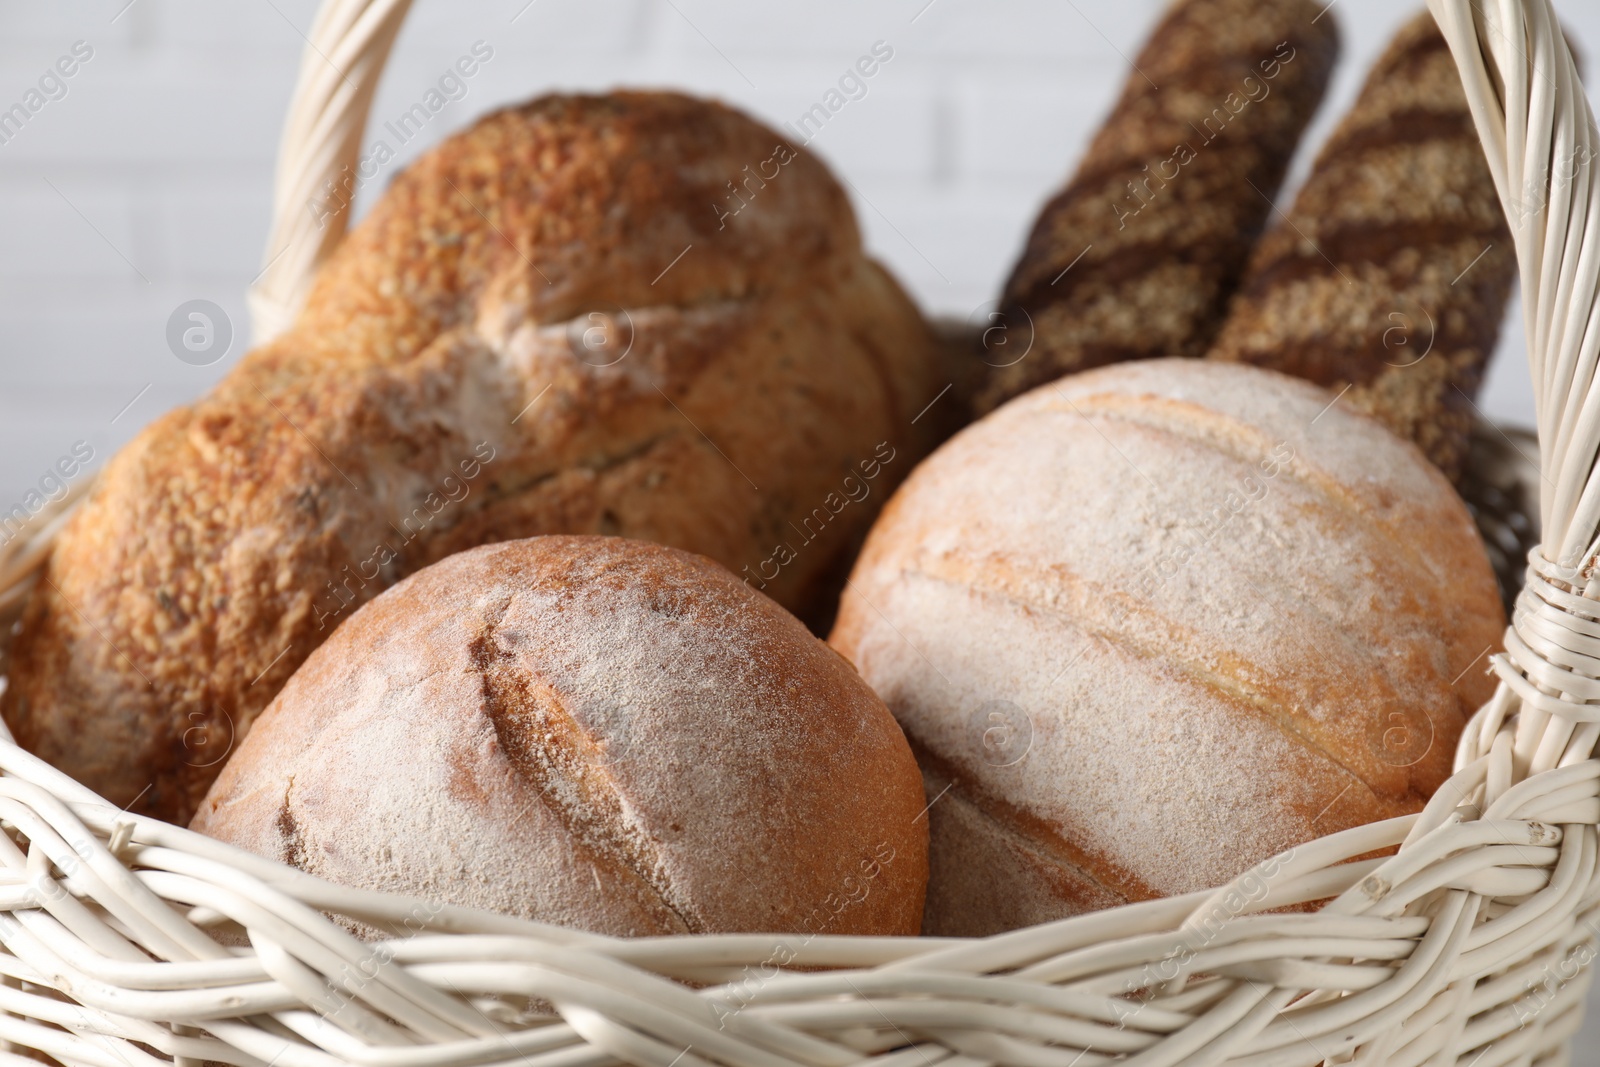 Photo of Different types of bread in wicker basket, closeup